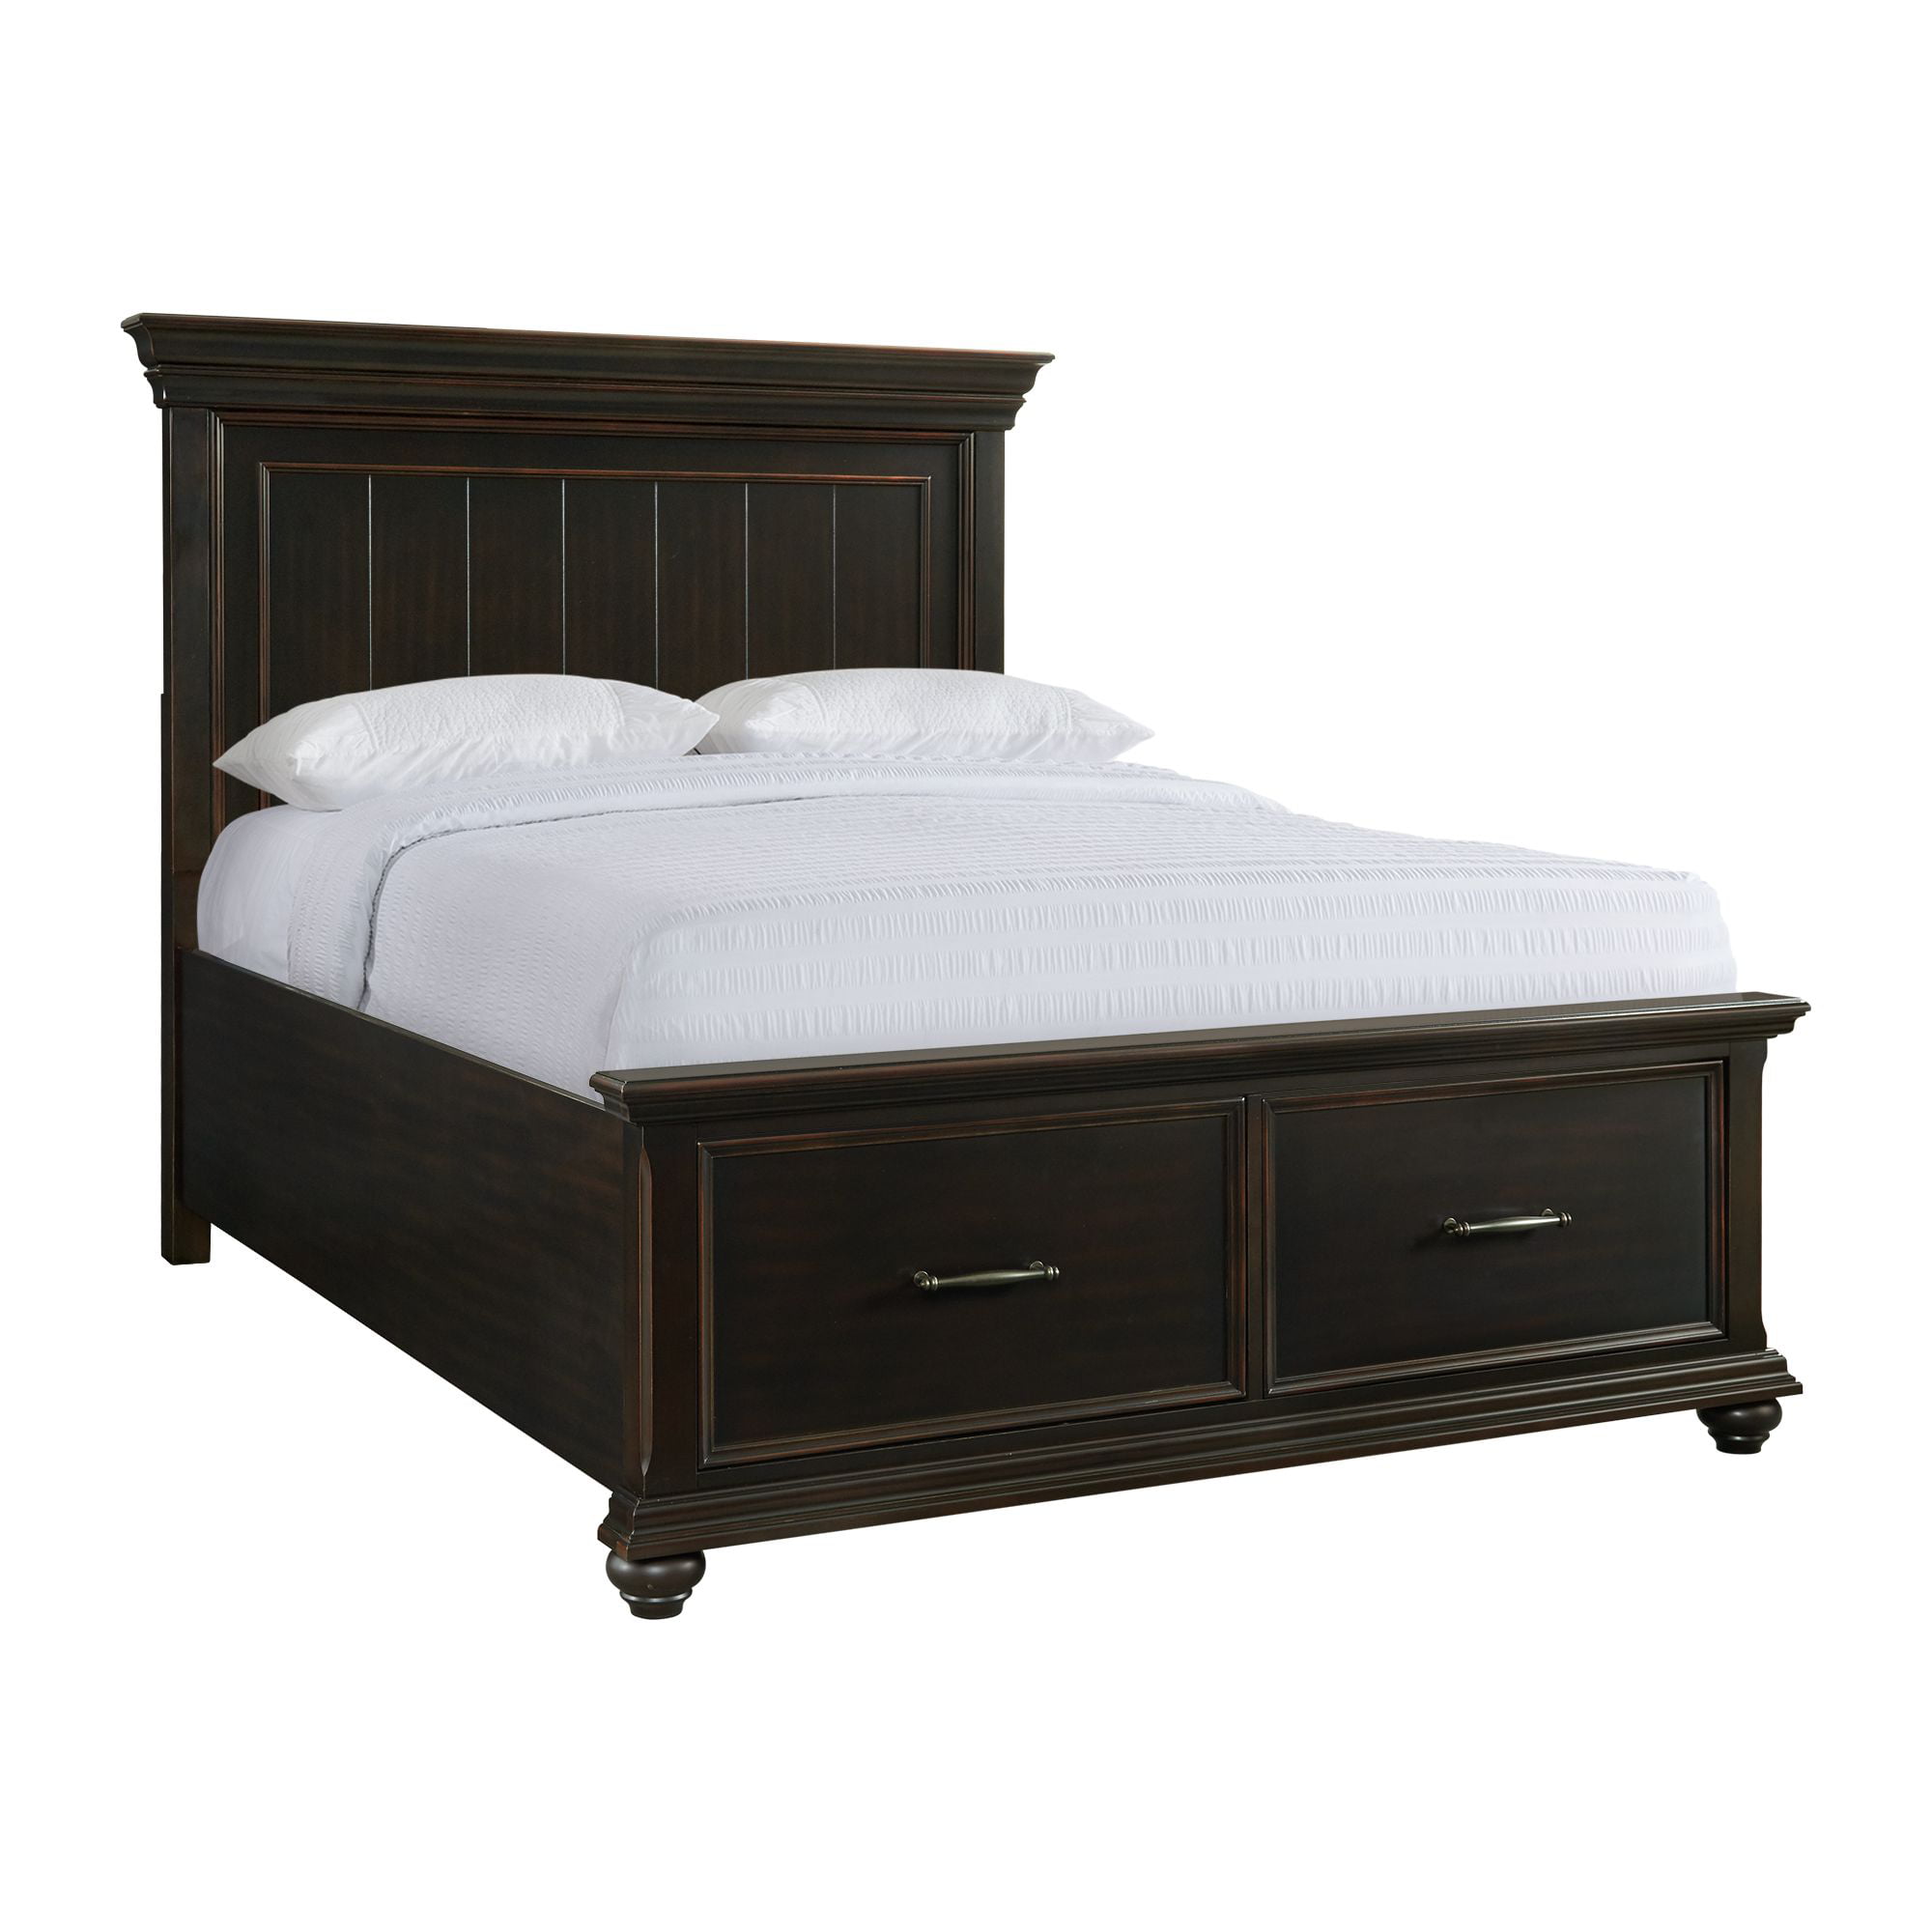 Eastern King Bookcase Bed With Underbed, Hillary Eastern King Bookcase Bed